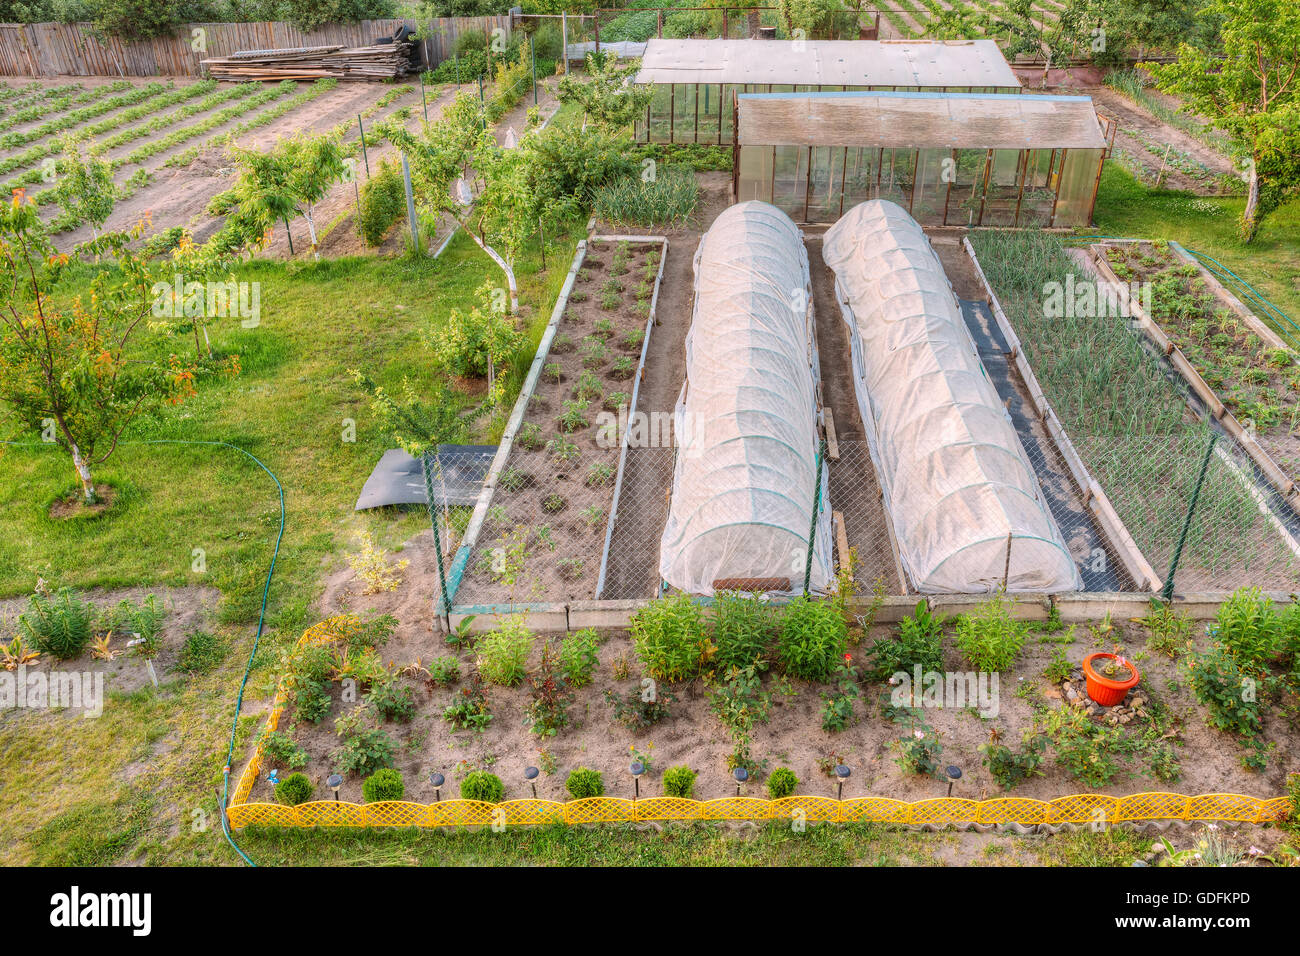 Vegetables Growing In Raised Beds In Vegetable Garden And Hothouses. Summer Season Stock Photo